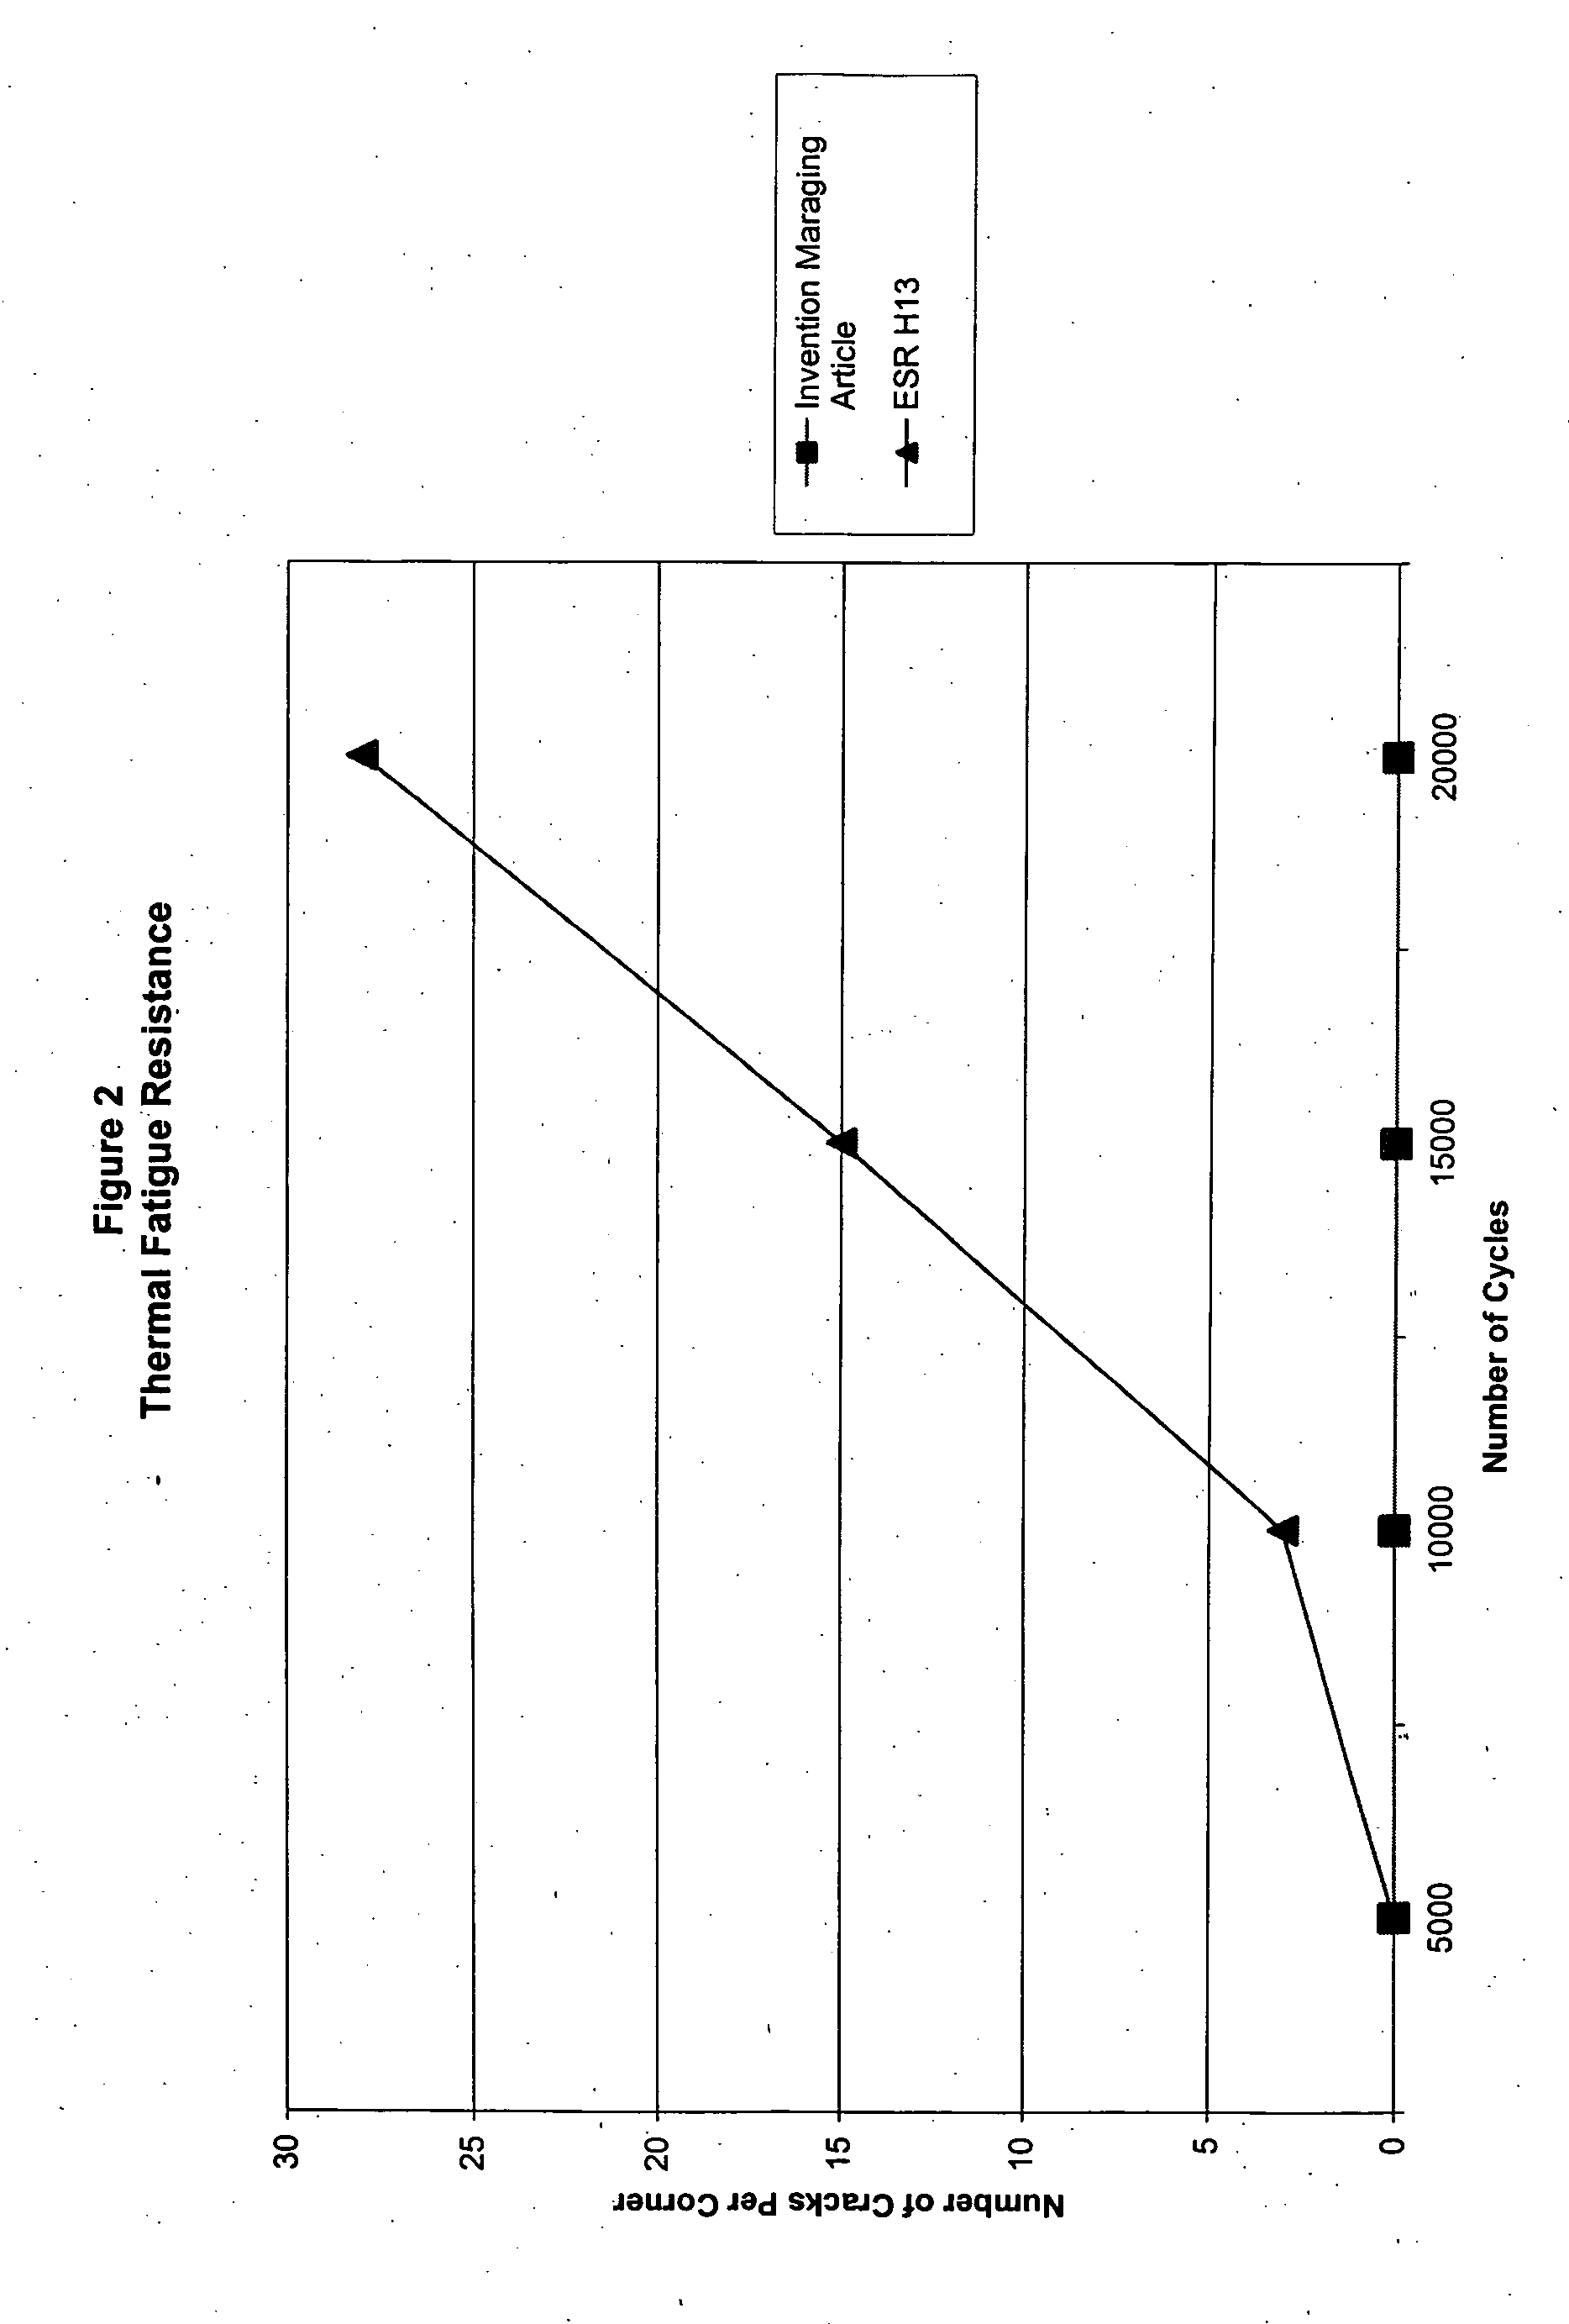 Maraging steel article and method of manufacture